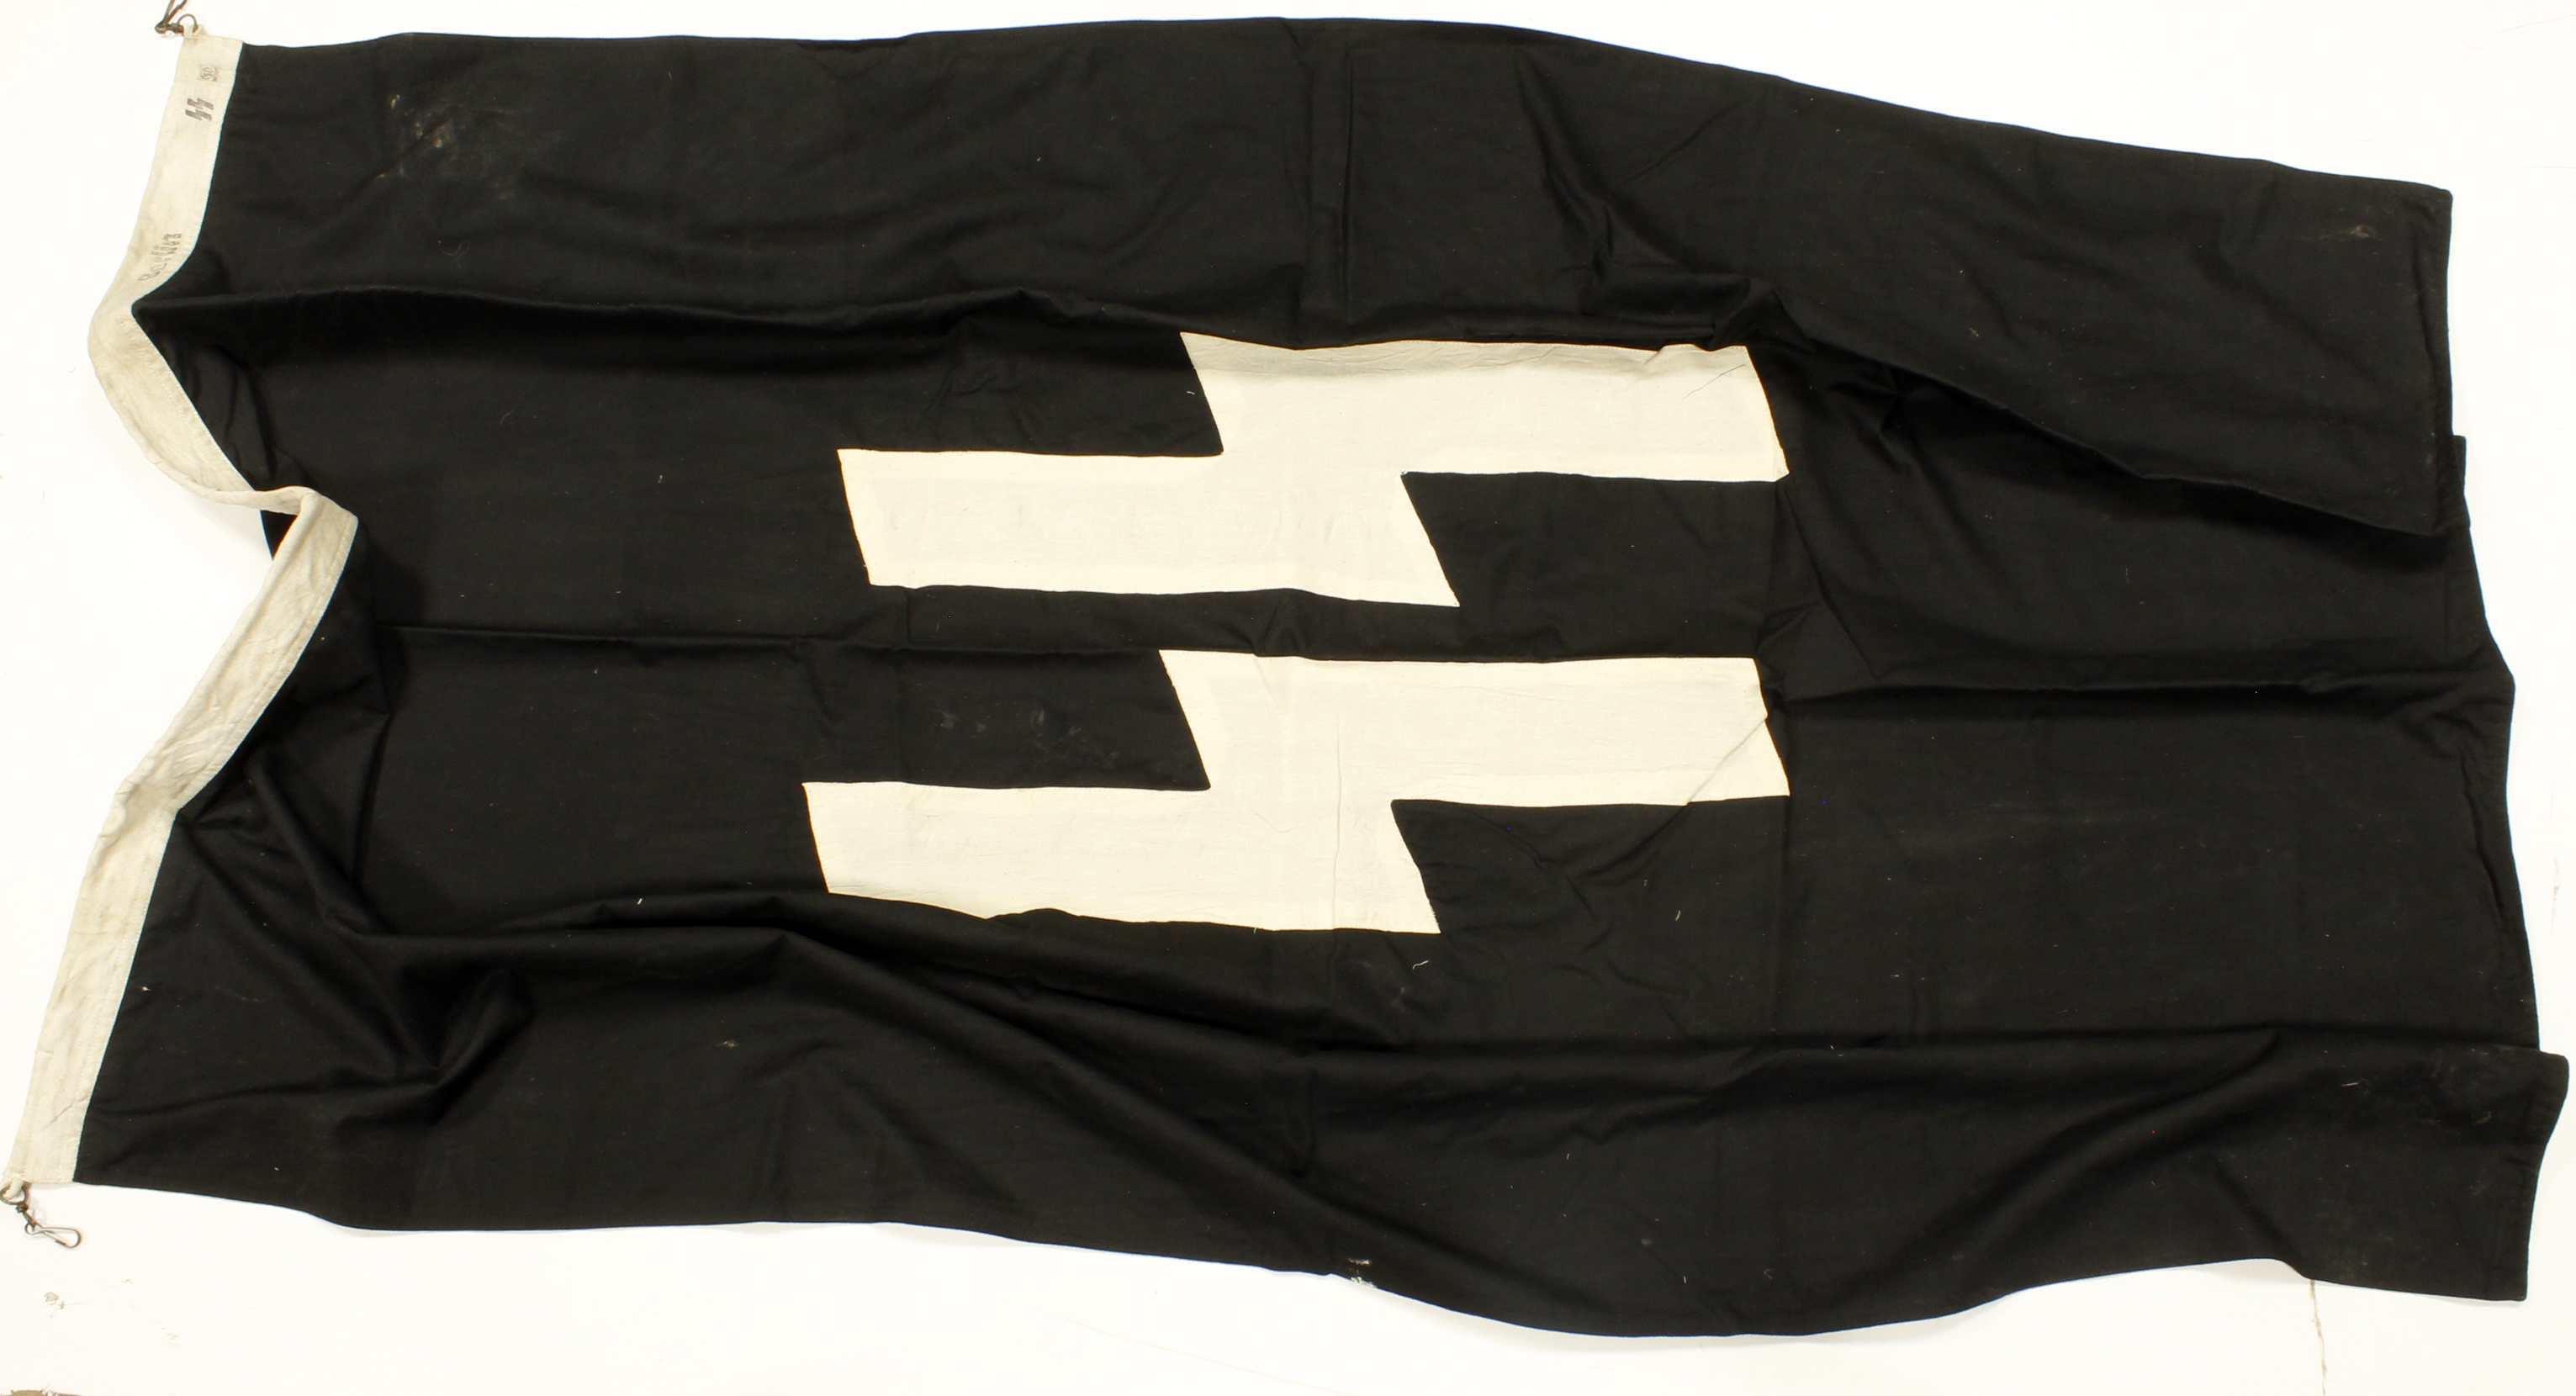 German SS banner with inspectors stamps to the lanyard with hanging hooks.